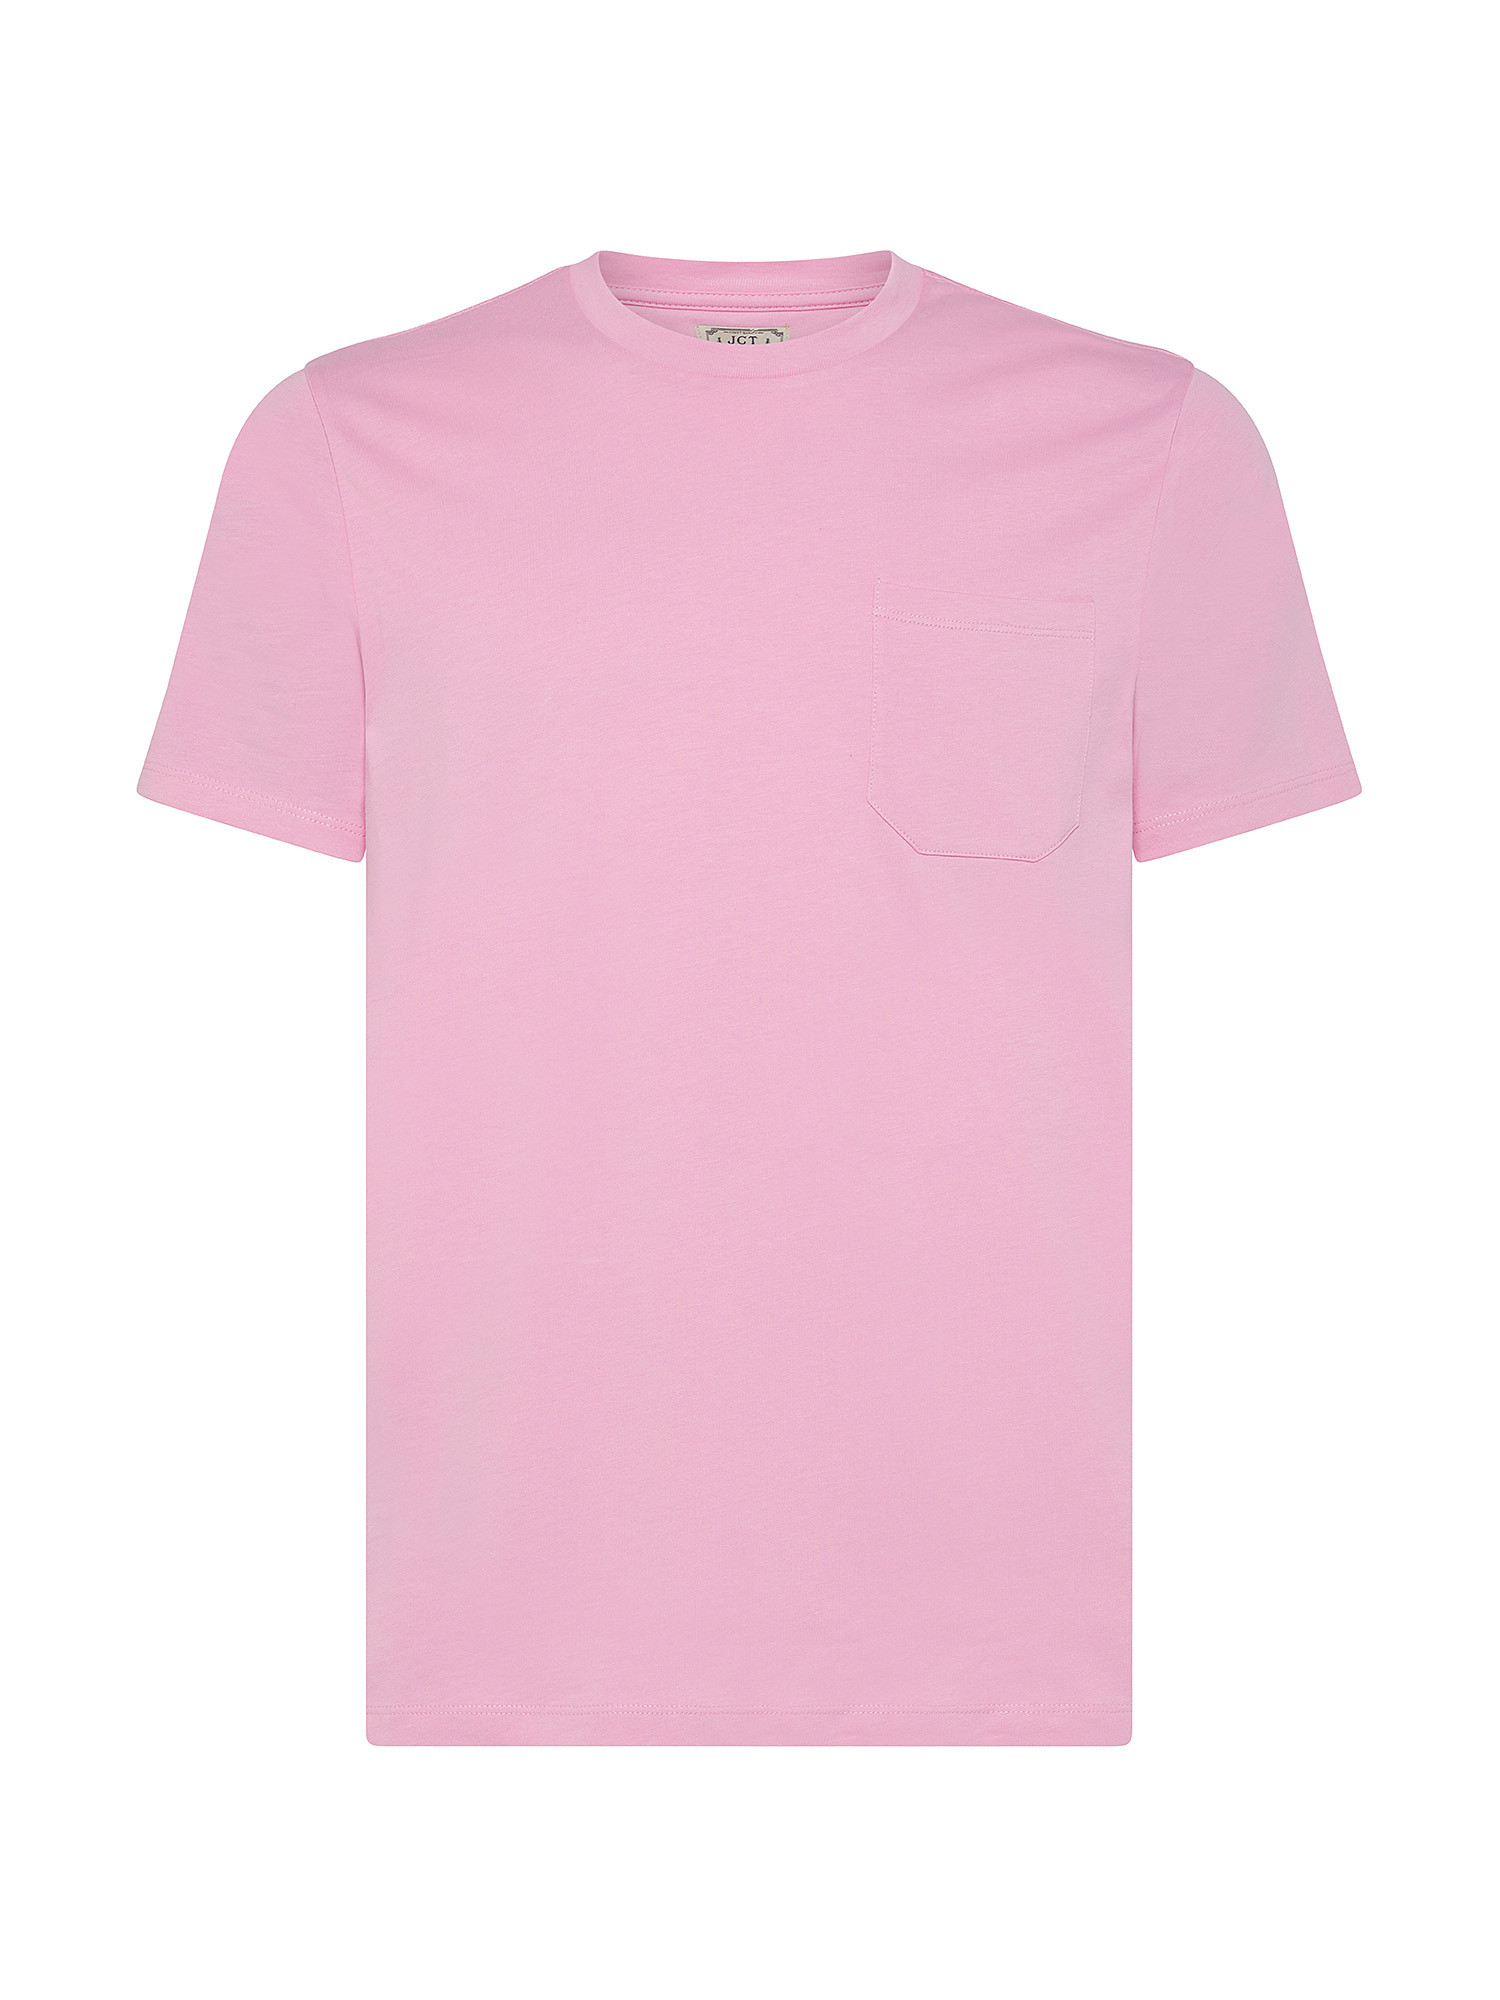 JCT - Pure supima cotton T-shirt, Pink, large image number 0